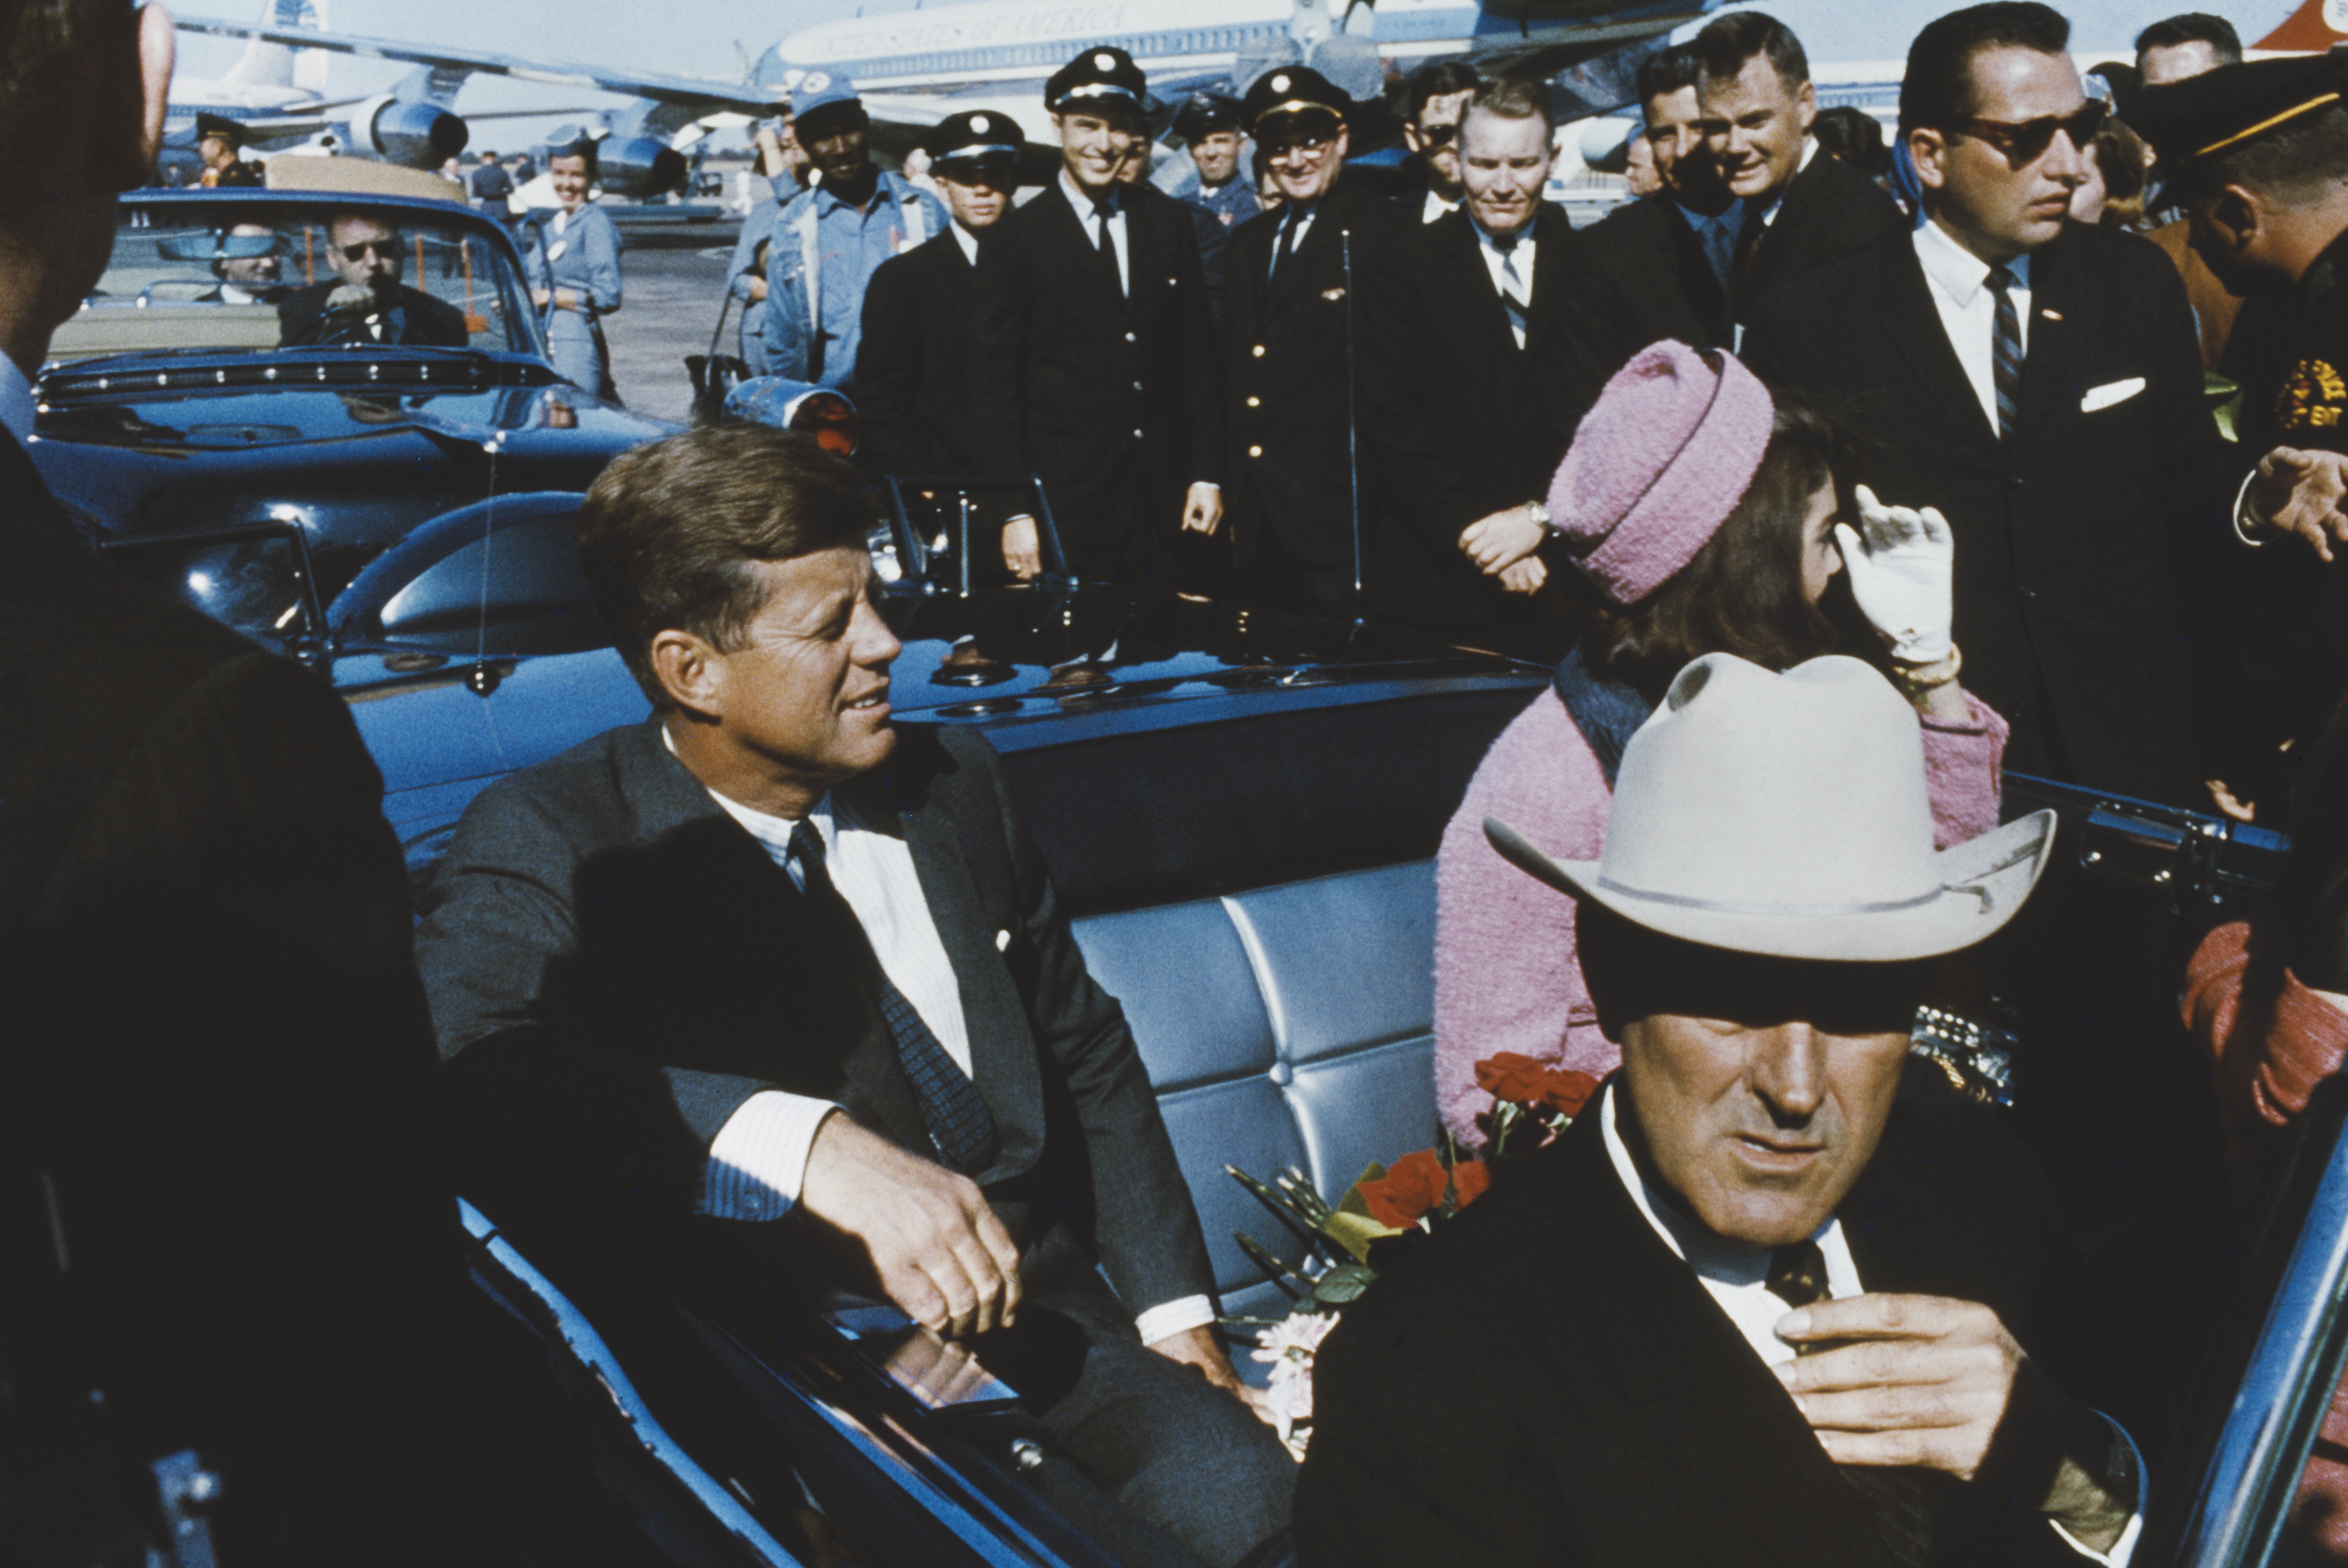 John F. Kennedy and Jackie Kennedy pictured on the day of his assassination in 1963, Dallas Texas. | Photo: Getty Images